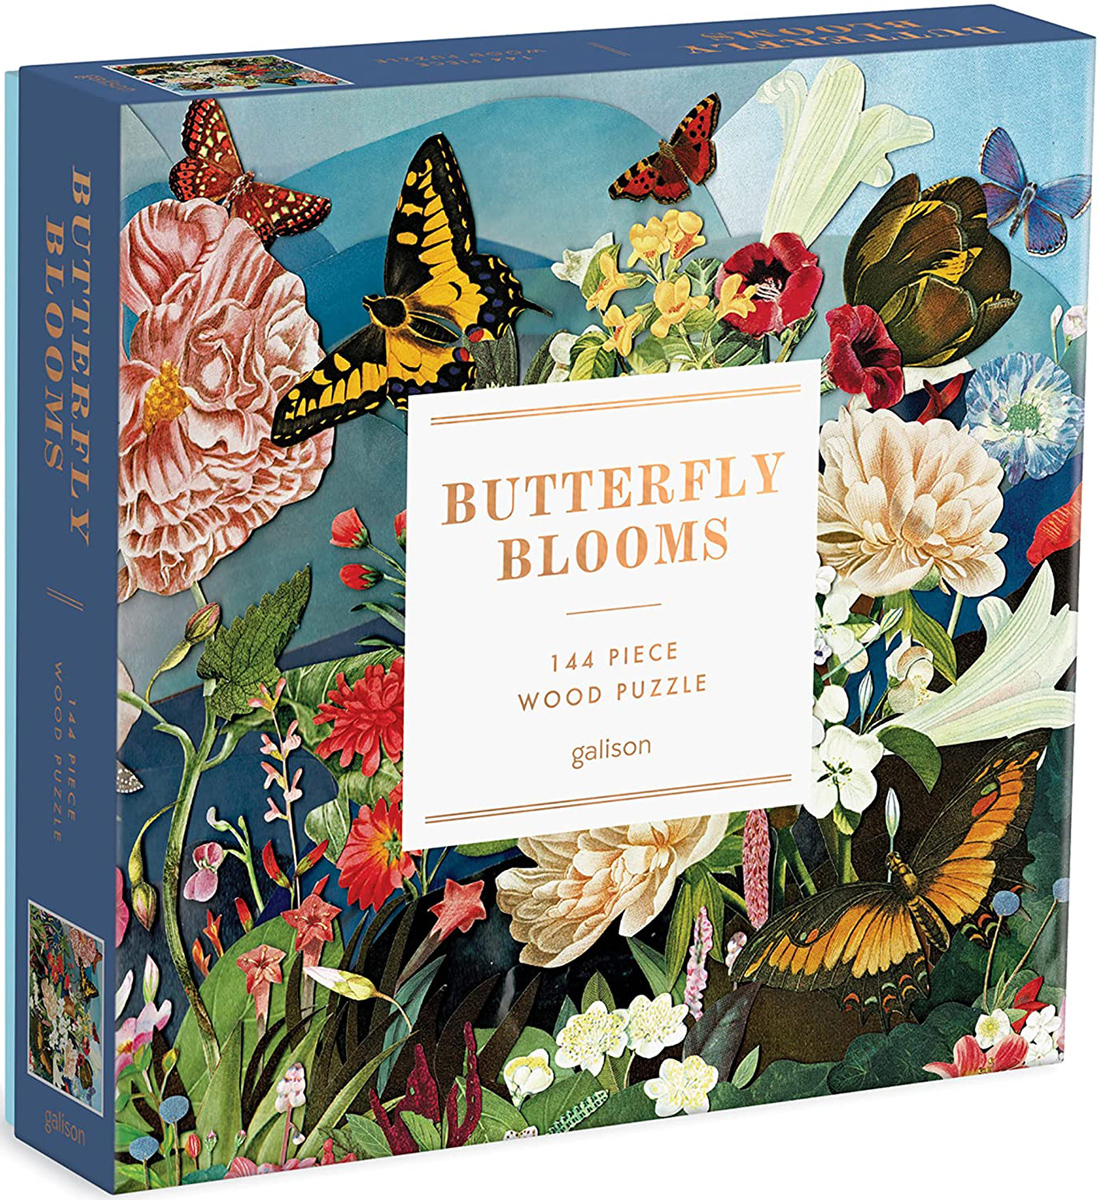 Wood Set Butterfly Blooms Butterflies and Insects Jigsaw Puzzle